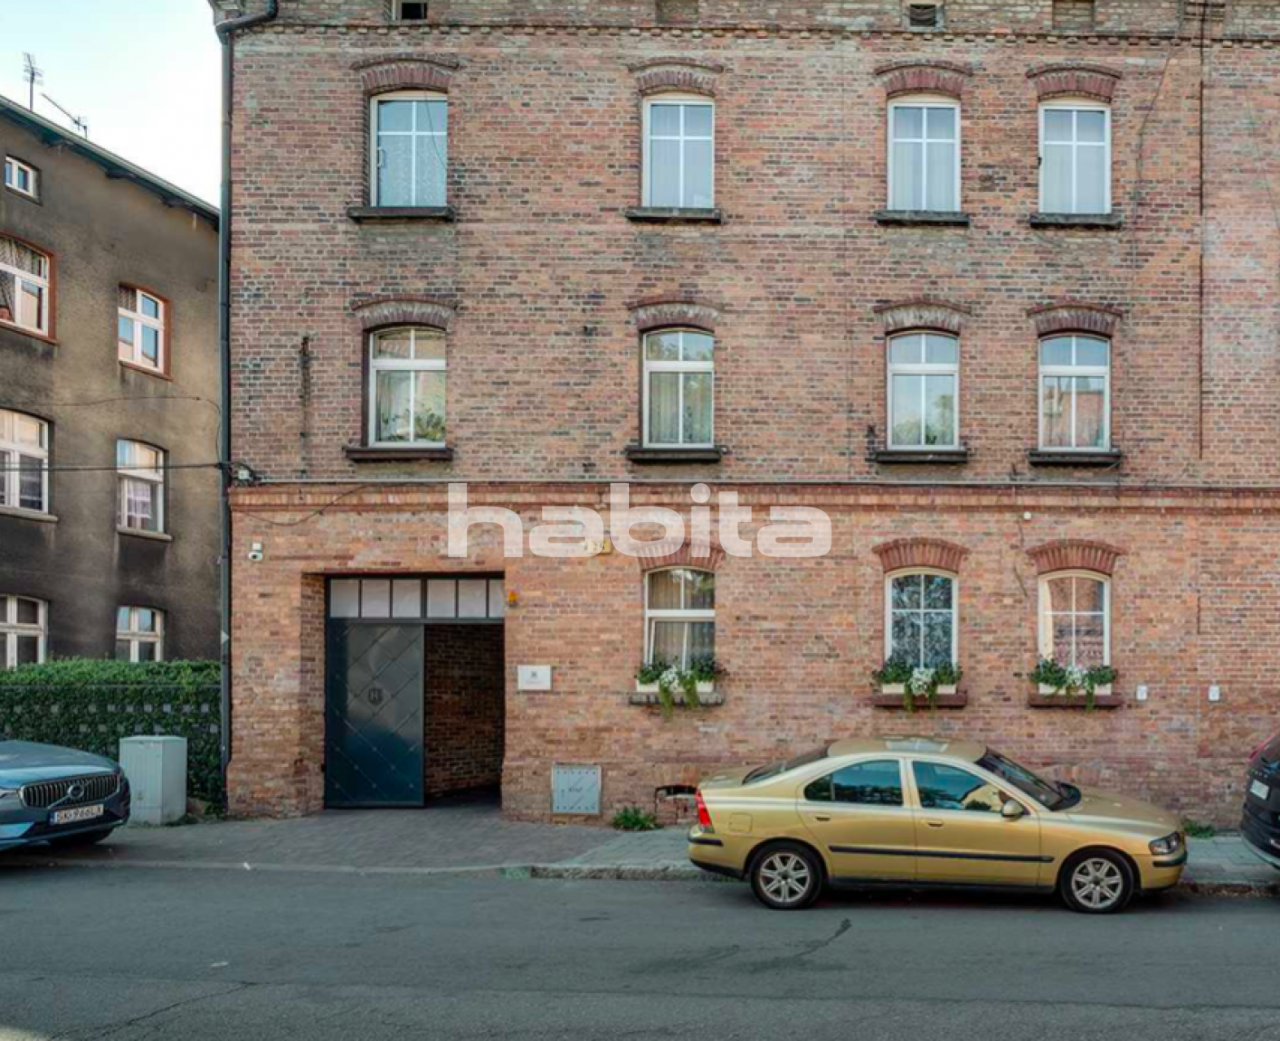 Commercial property Katowice, Poland, 368 sq.m - picture 1